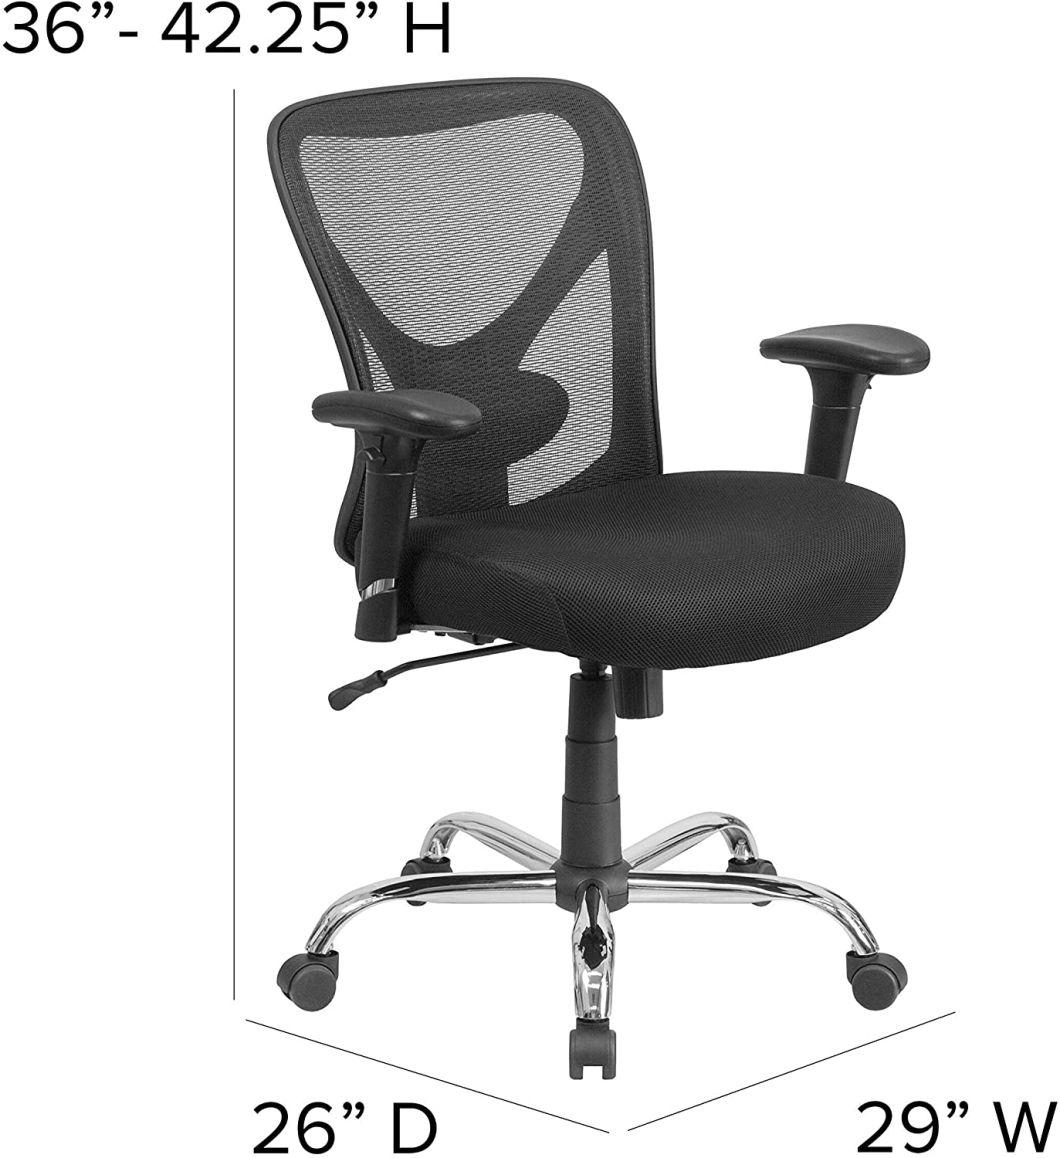 Meeting Room Ergonomic Computer Gaming Office Chairs